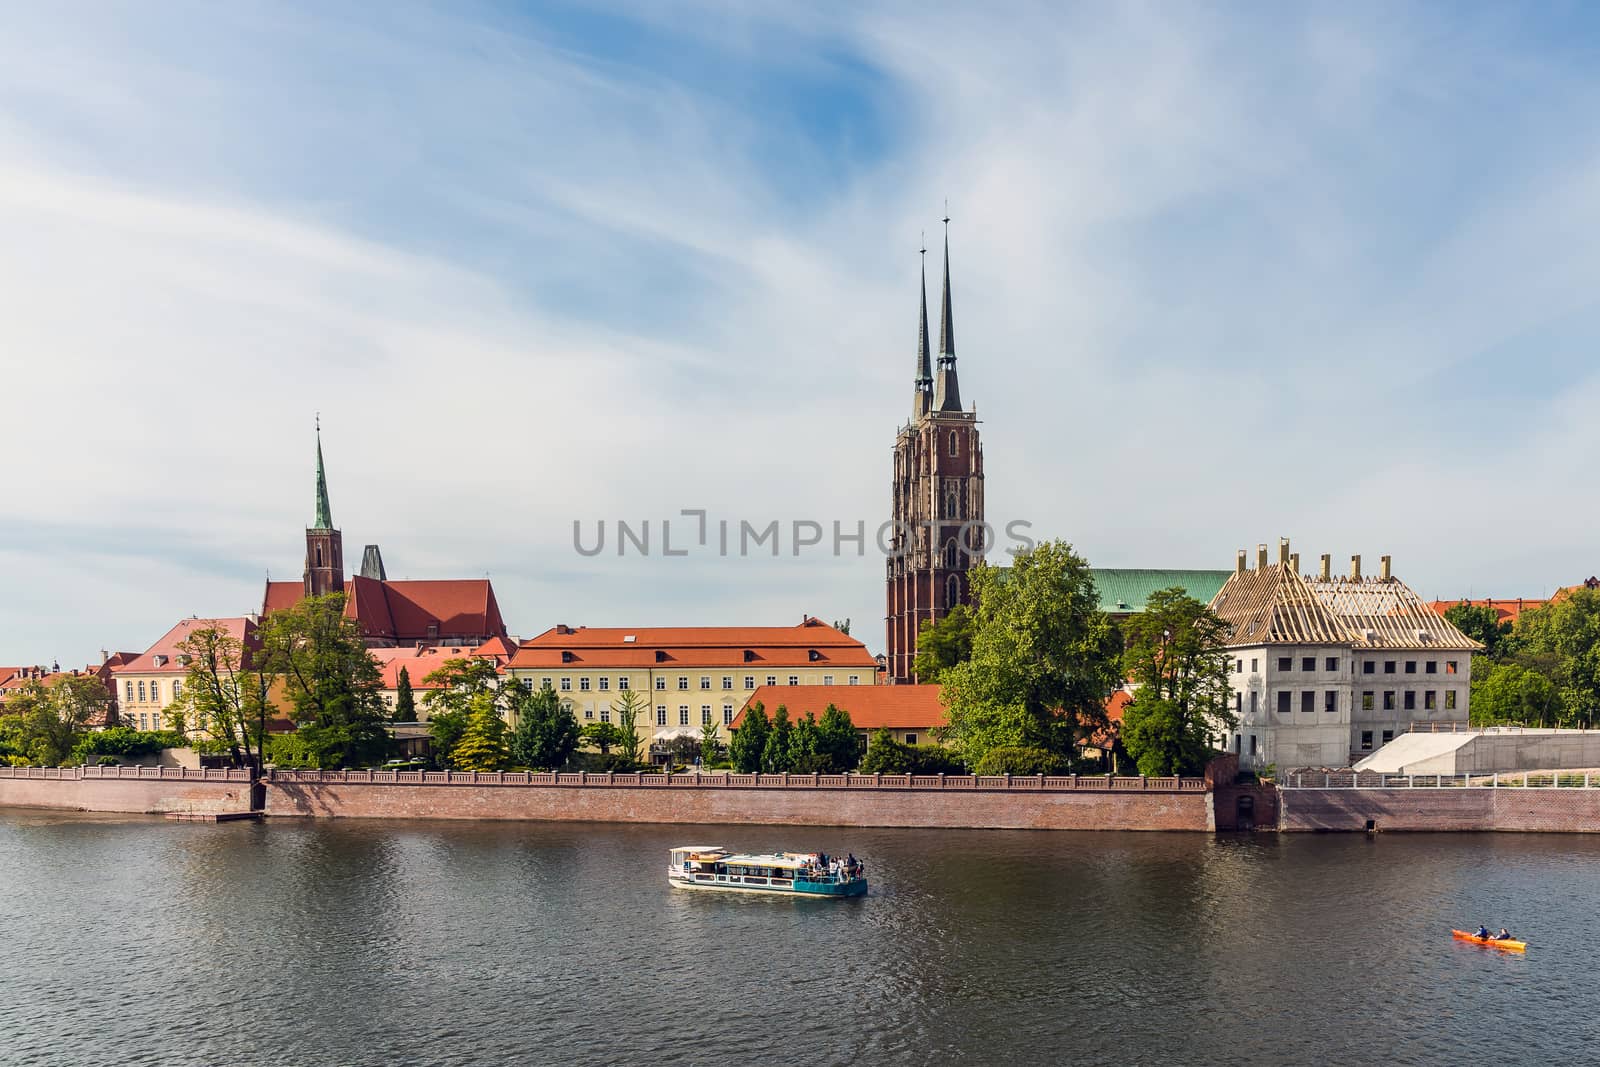 Pleasure boat and canoe on the Oder river in Wroclaw by the Ostrow Tumski, the oldest part of the city with The Cathedral of St. John the Baptist and The Church of the Holy Cross.